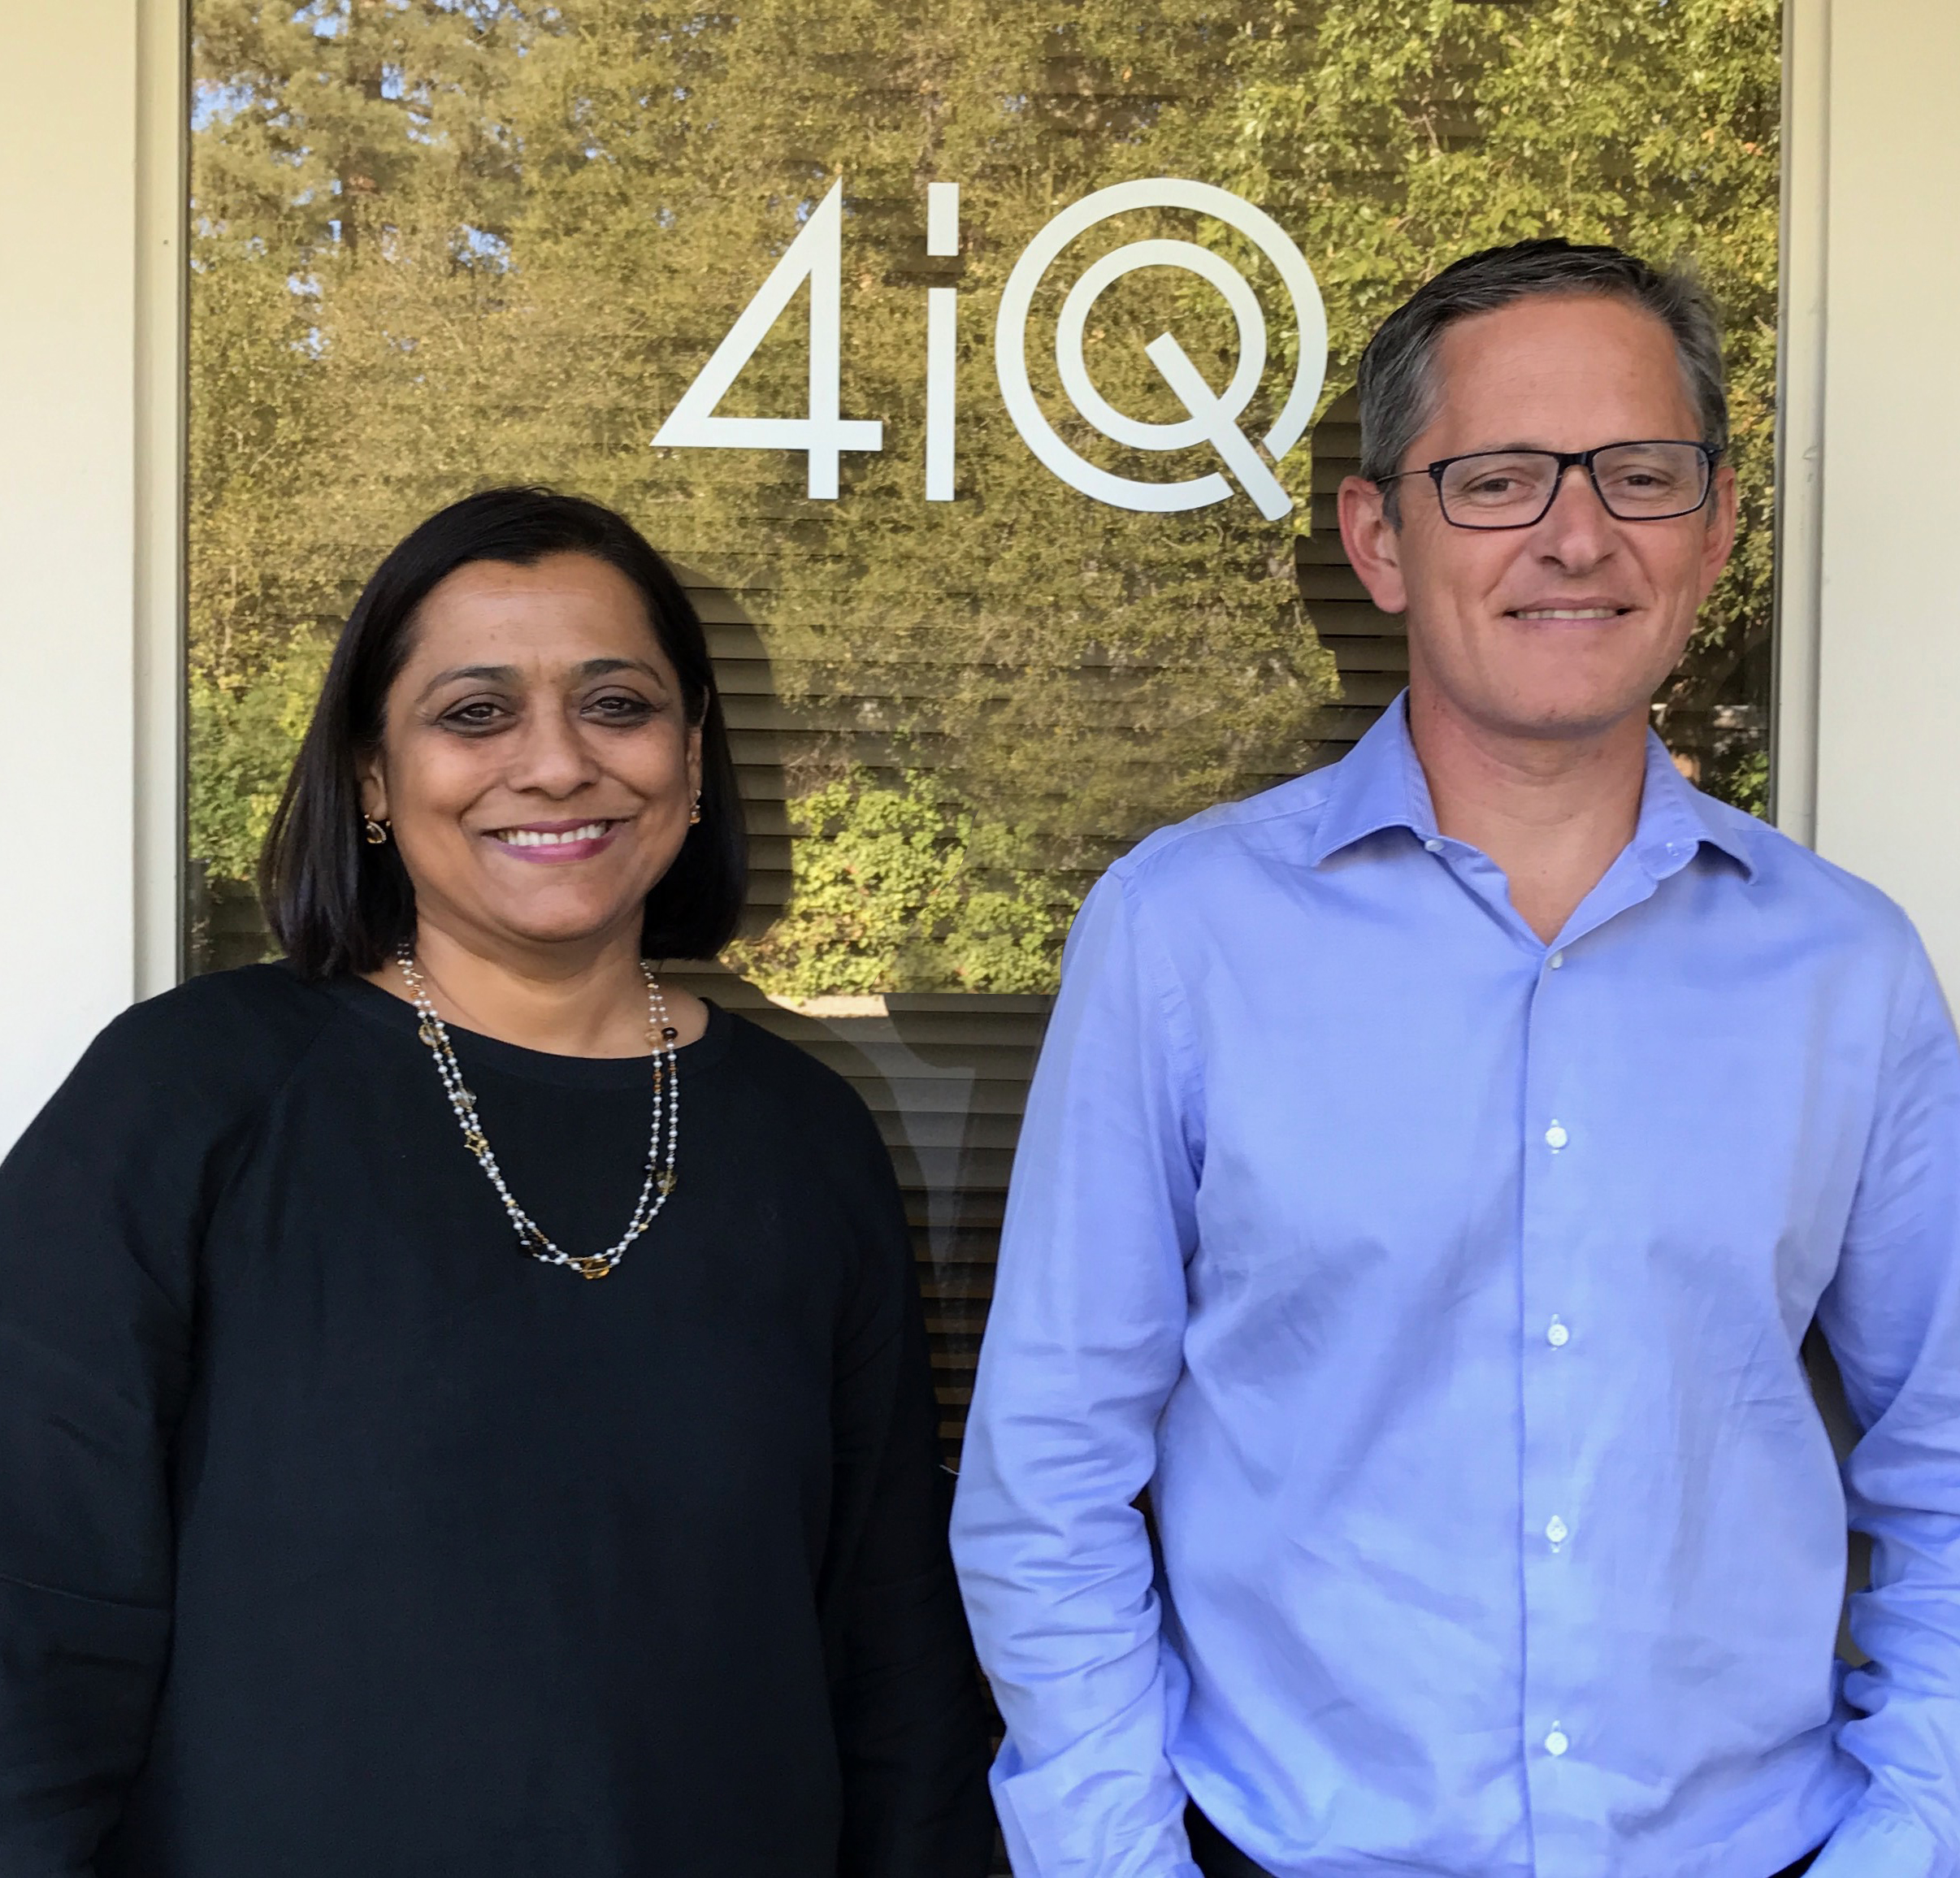 Monica Pal, CEO At 4iQ and Julio Casal, co-founder at 4iQ